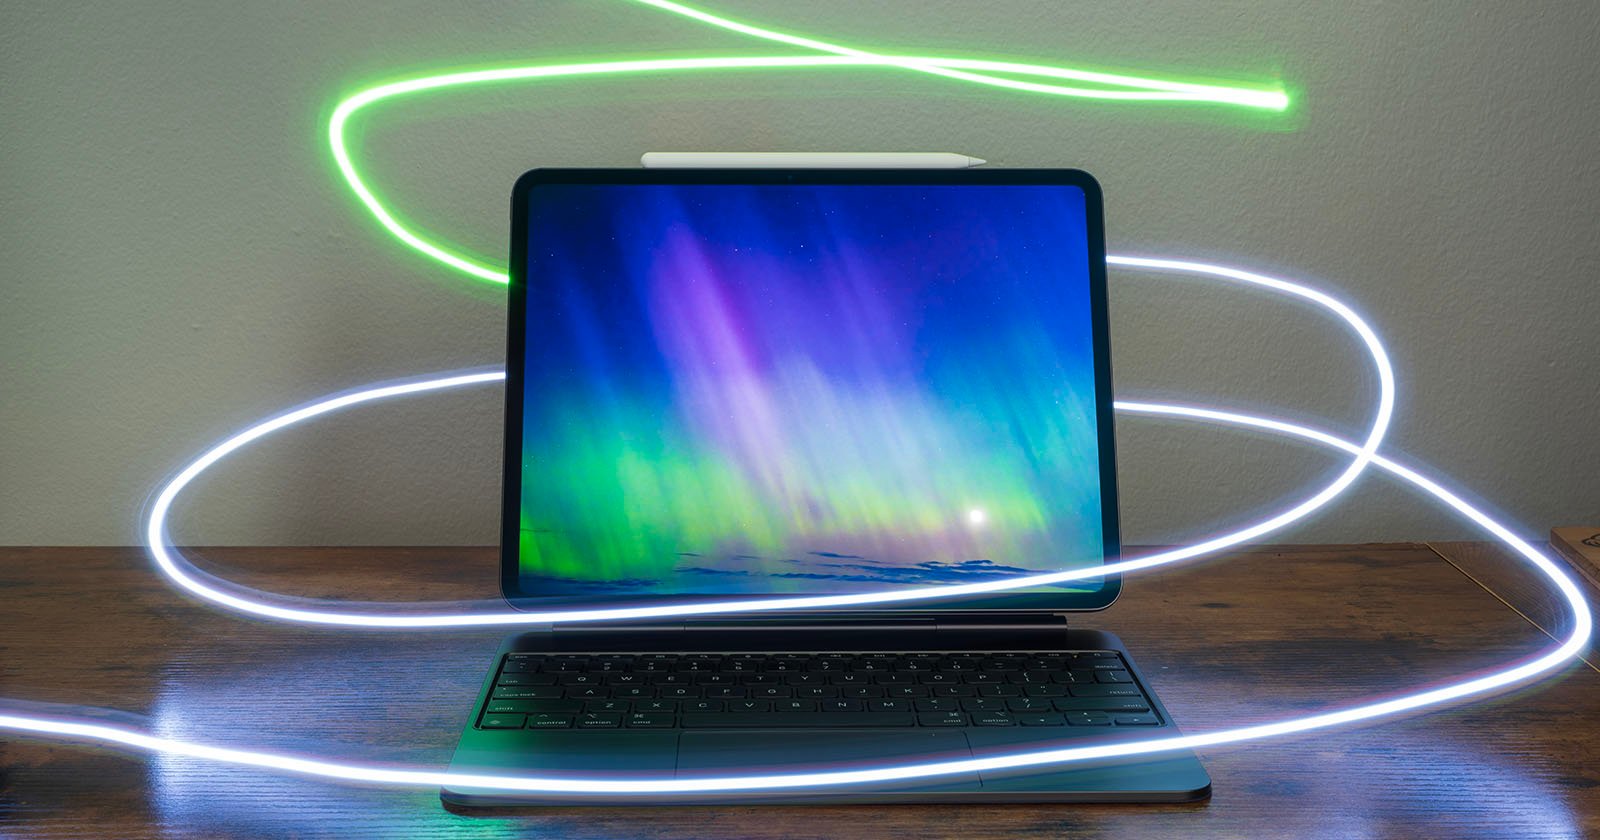 A tablet with a keyboard is shown on a wooden surface. The screen displays a colorful aurora image. A light pen rests on top of the tablet, and glowing light trails in green and white swirl around the tablet, creating a dynamic visual effect.